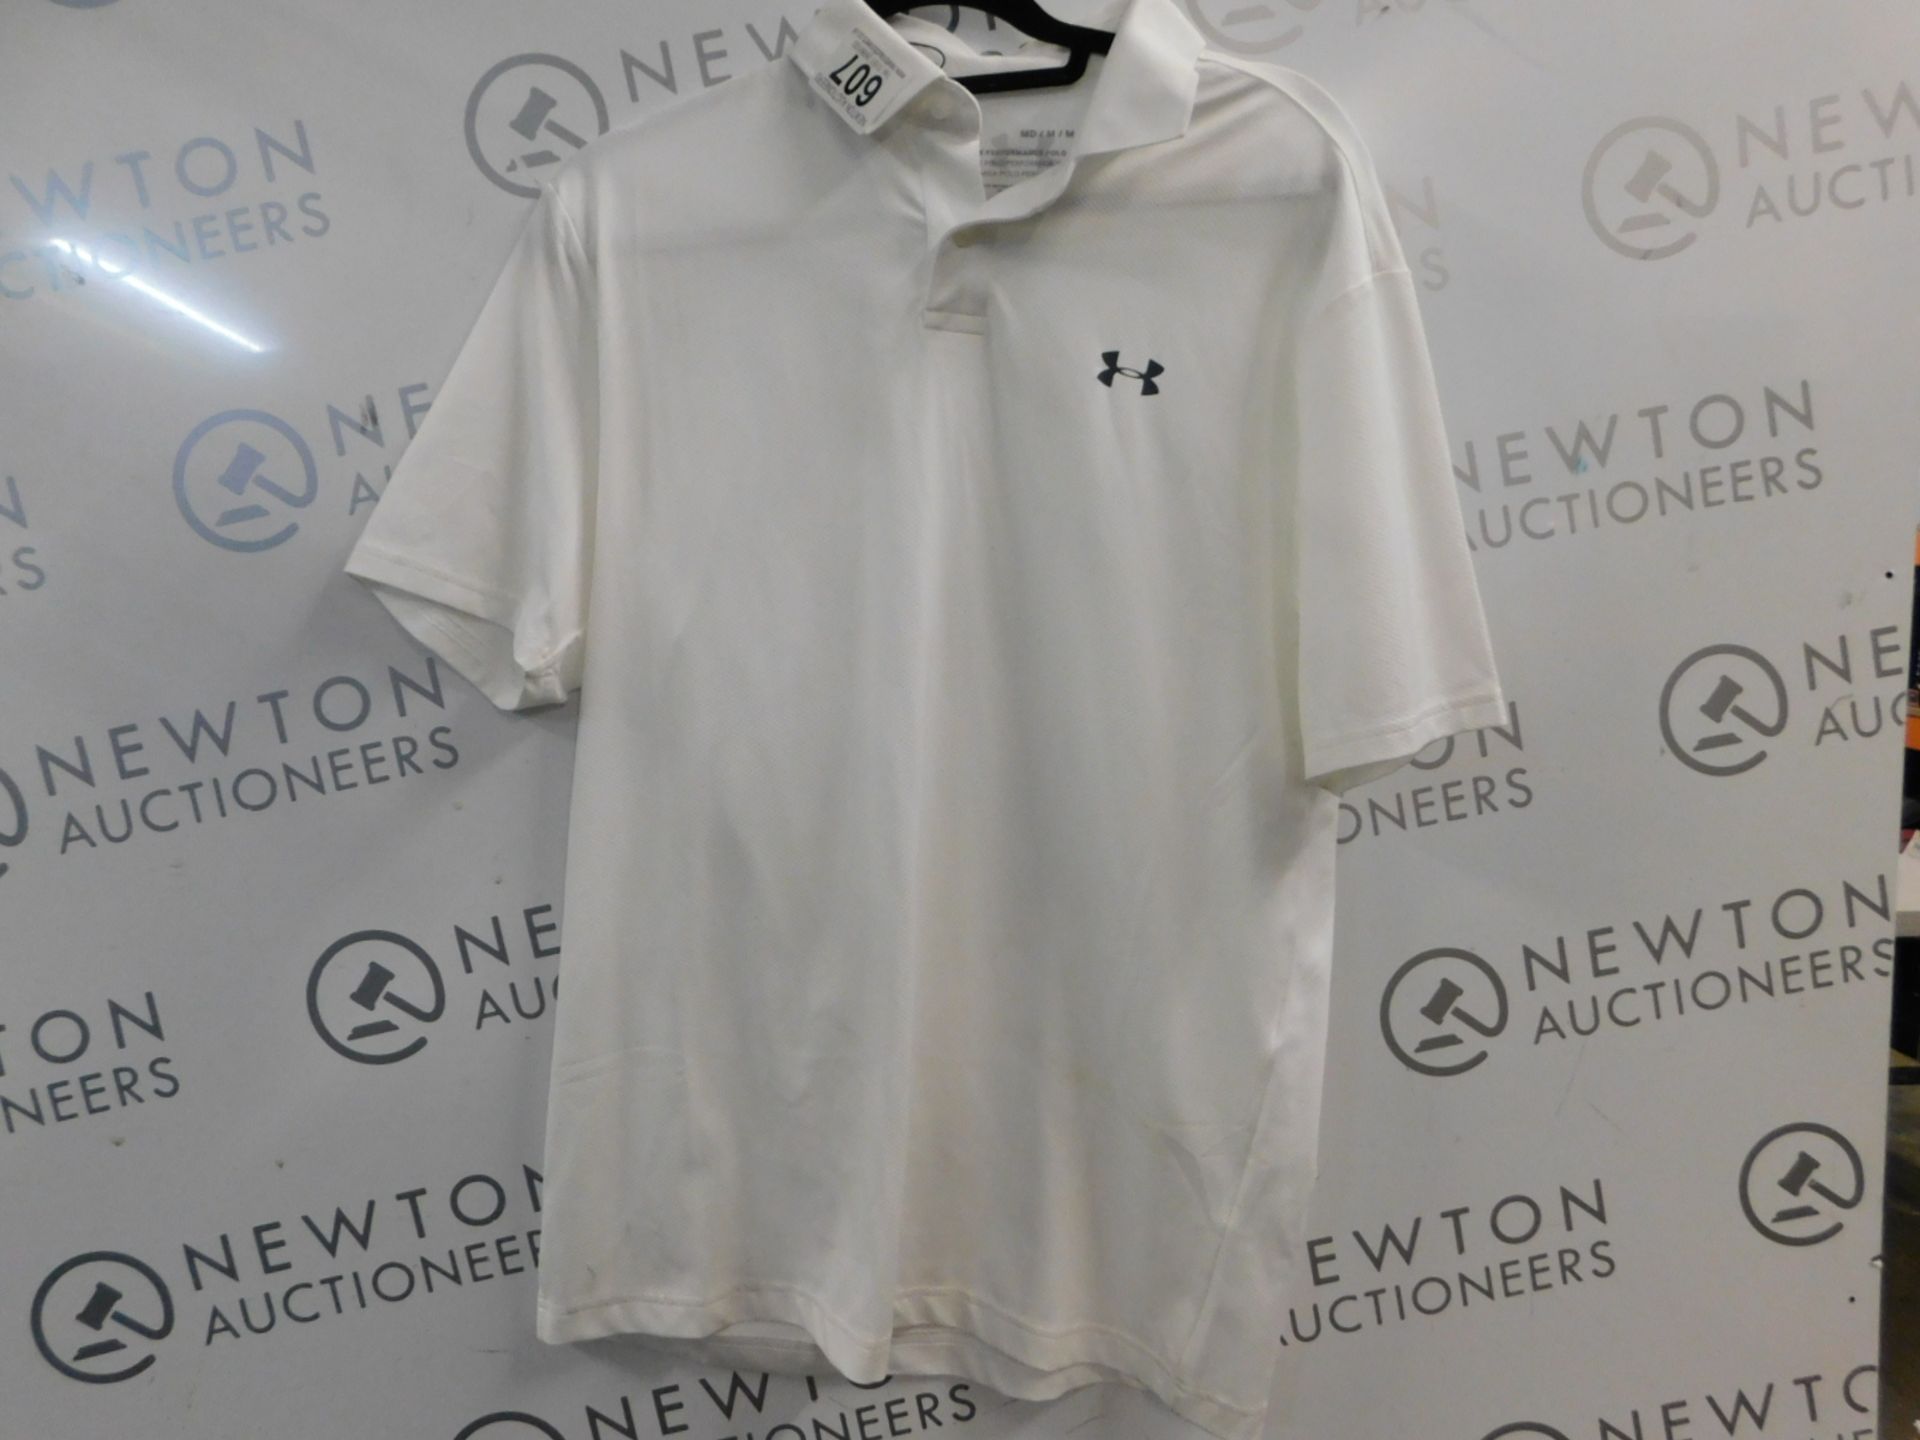 1 UNDER ARMOUR MENS PERFORMANCE POLO SHIRT SIZE L RRP £34.99